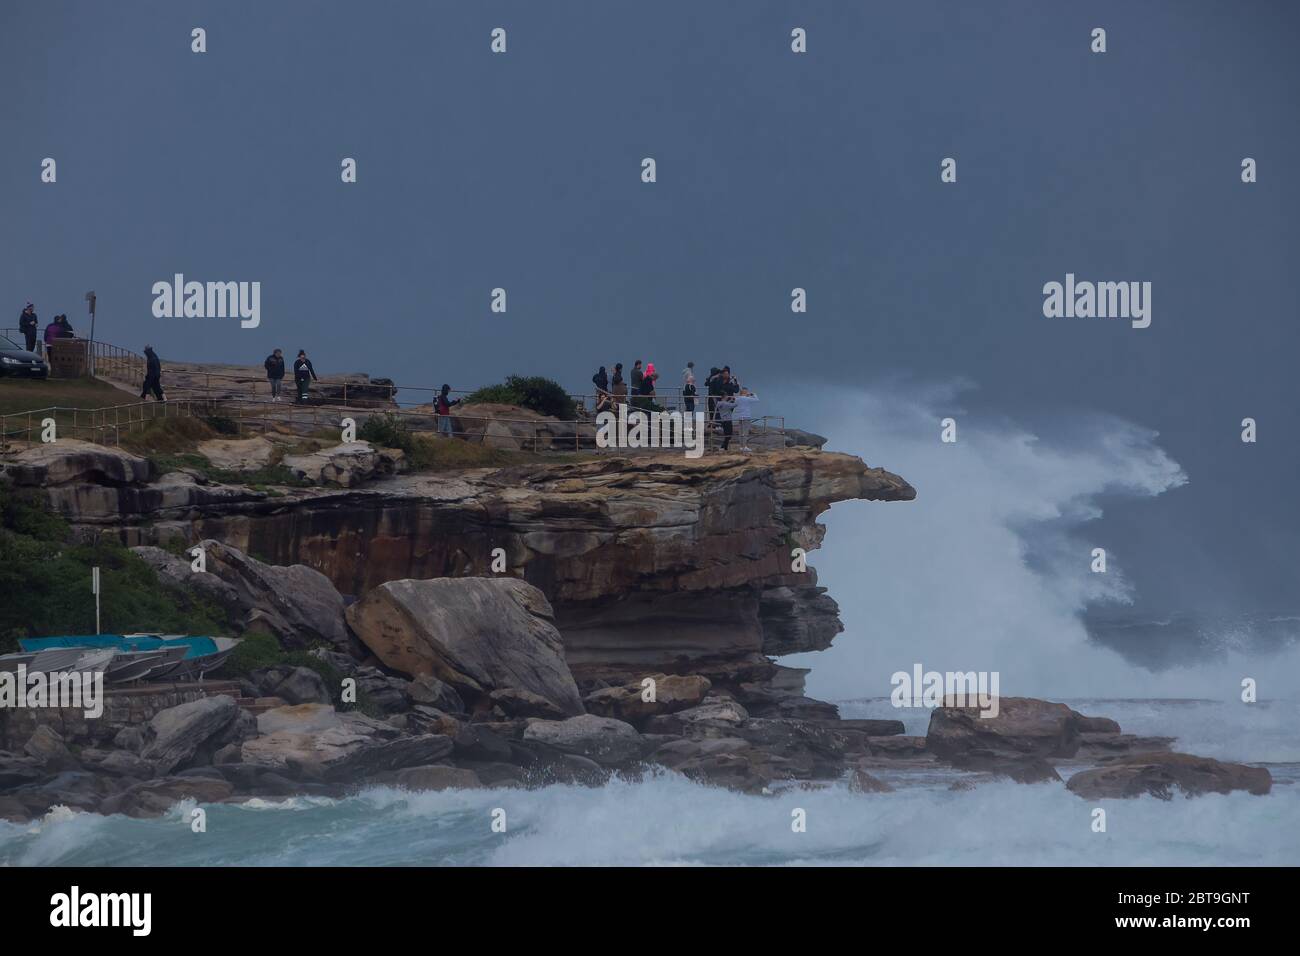 Sydney, Australia. Sunday 24th May 2020. Bondi Beach in Sydney's Eastern suburbs experiences very rough surf conditions today with  massive waves. People seen watching the rough surf conditions at Ben Buckler Point, Bondi. Credit Paul Lovelace/Alamy Live News Stock Photo